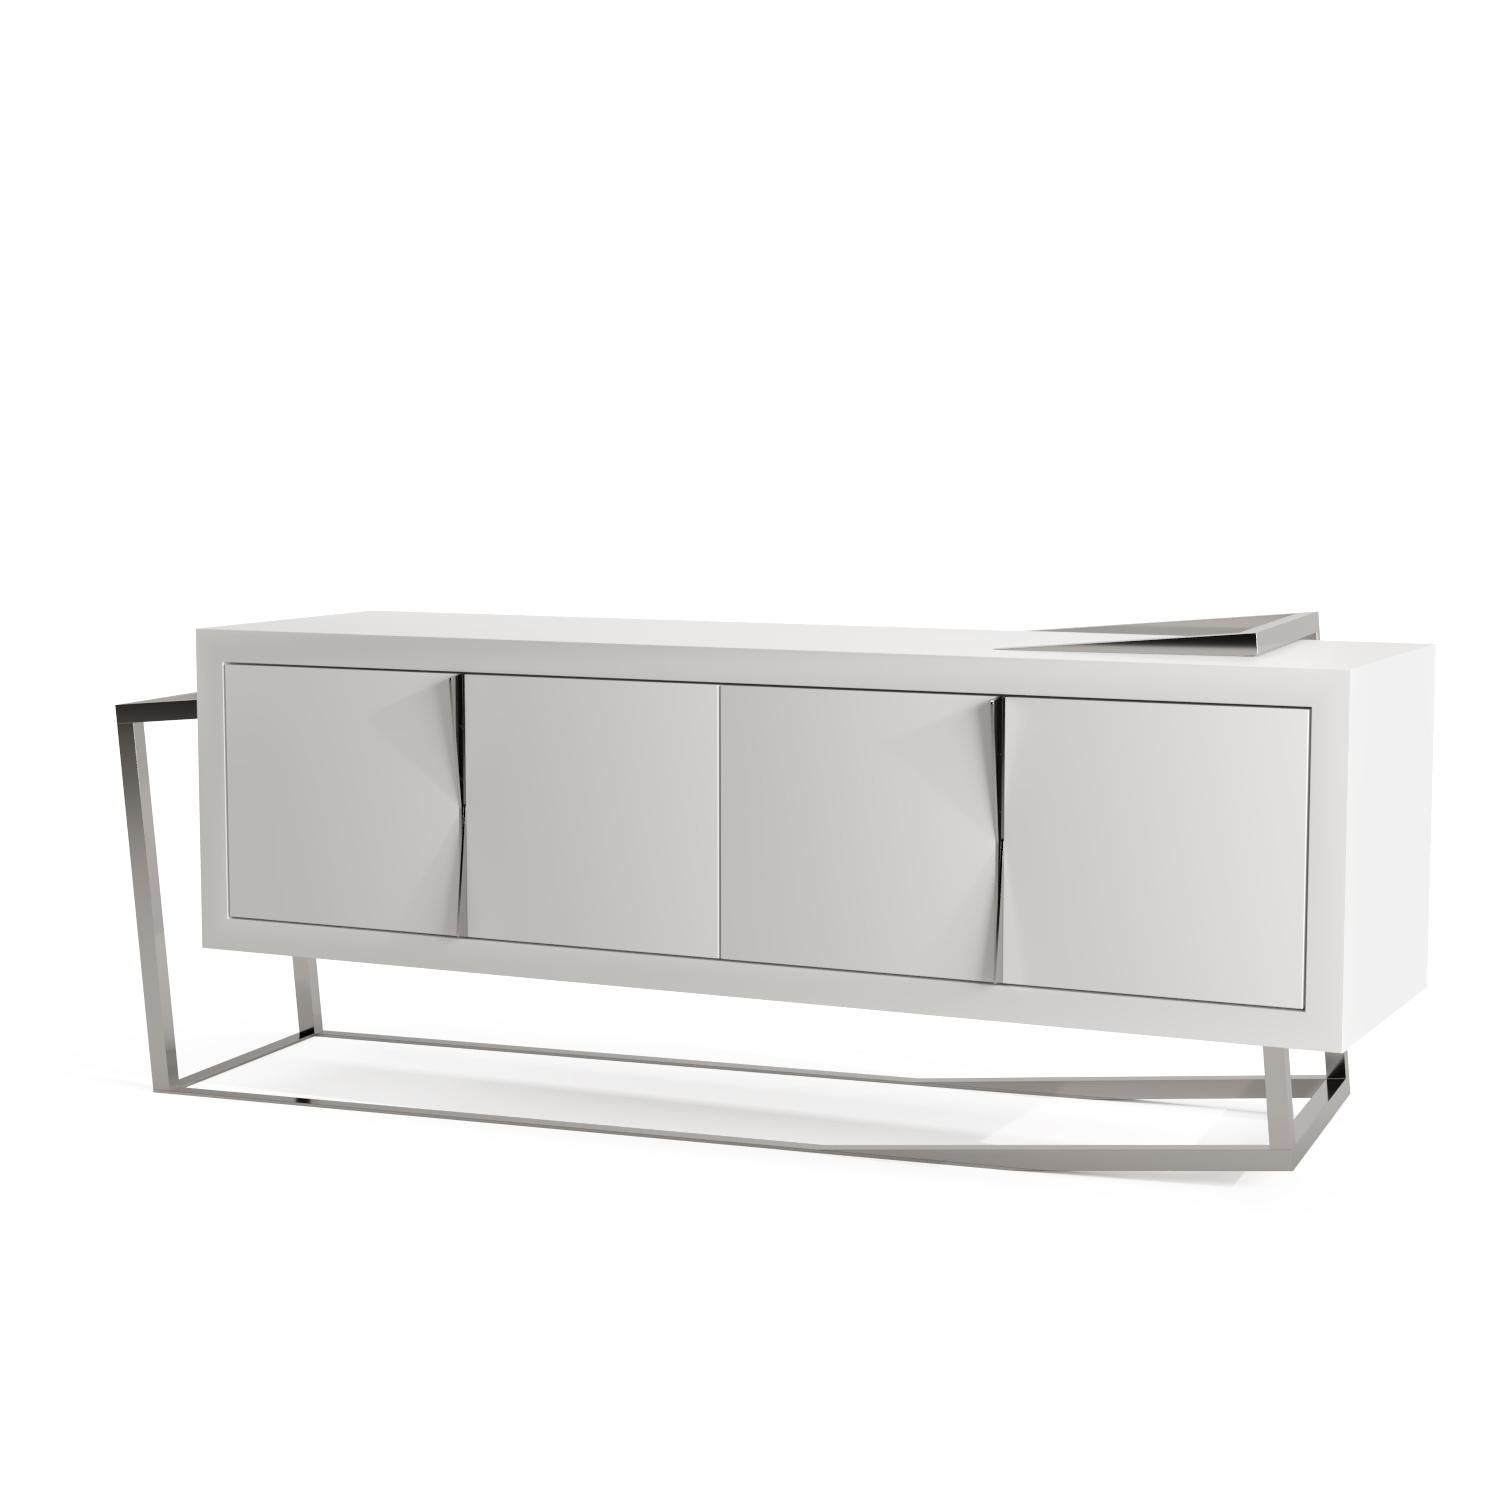 The Credenza Sideboard ExCentric 1.0 is made in white lacquered wood and brushed stainless steel and can be placed in a dining or office room. Its contemporary and edgy design challenges the perceptions of a usual sideboard. This piece would make